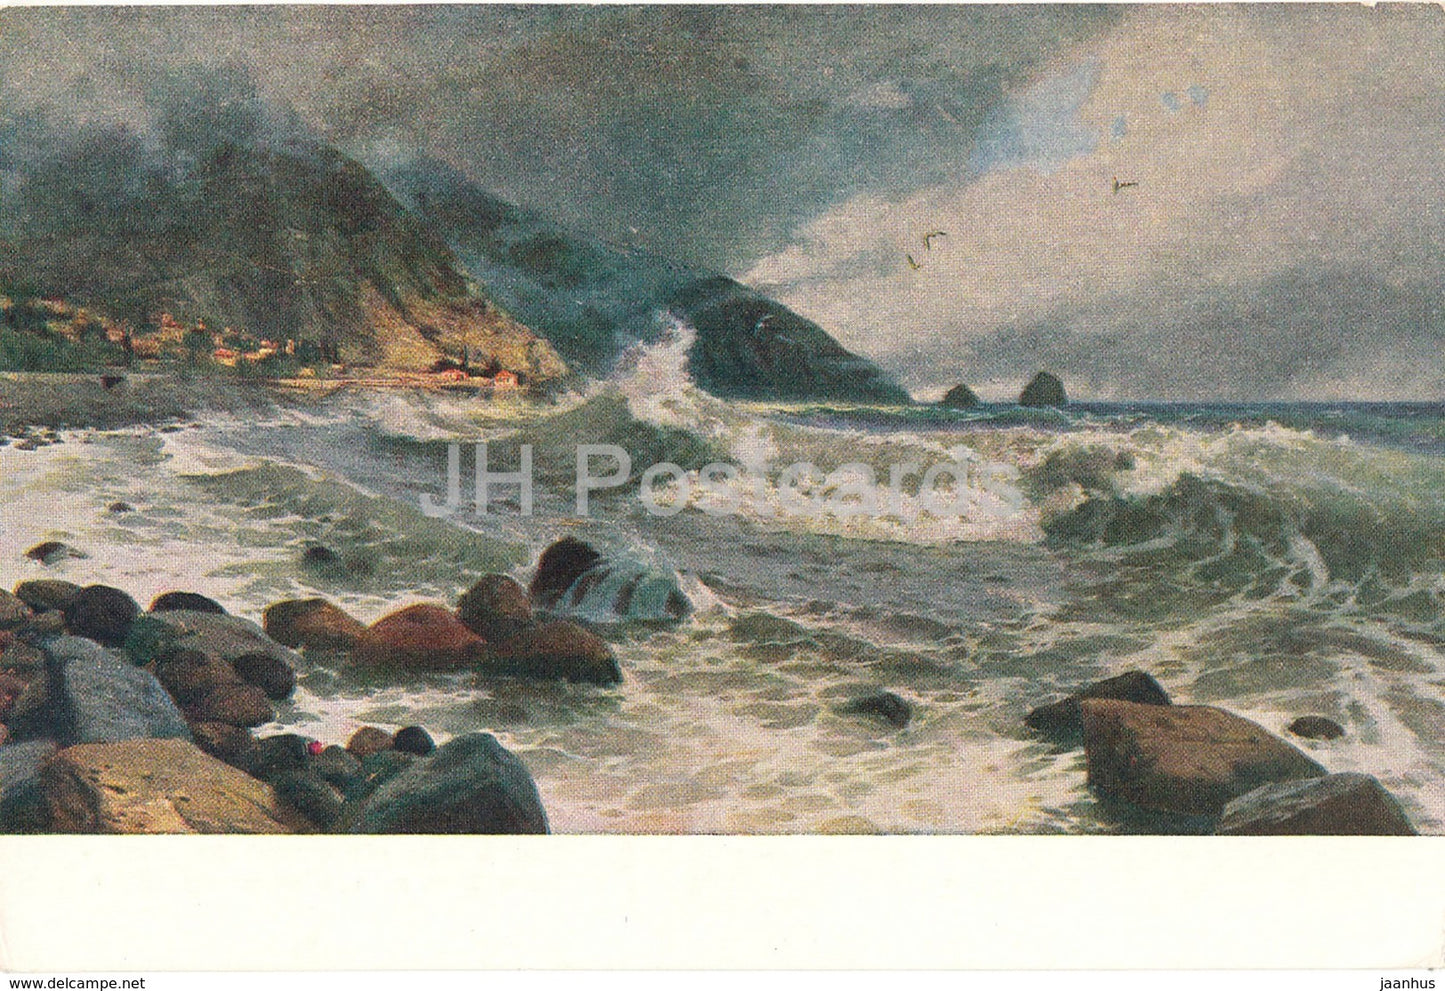 painting by V. Puzyrkov - Surf - Russian art - 1953 - Russia USSR - unused - JH Postcards